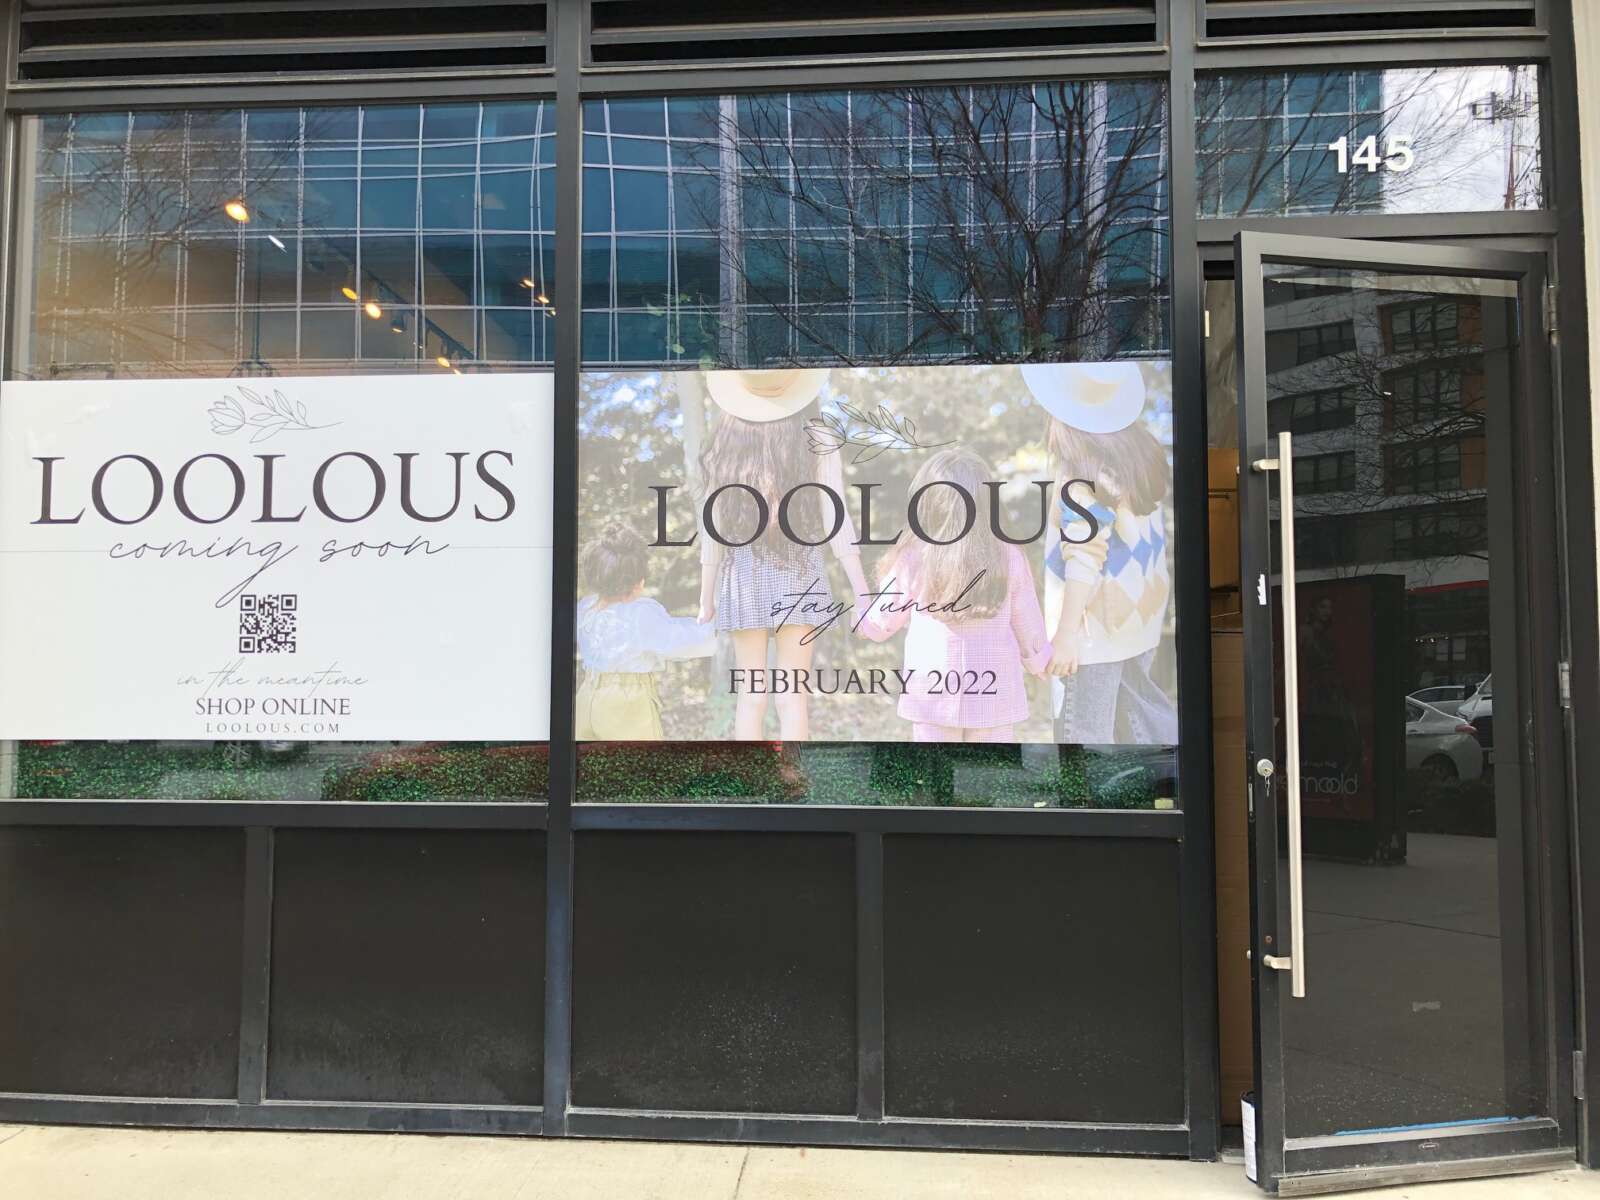 Young girls’ fashion brand is opening a store in the Mosaic District